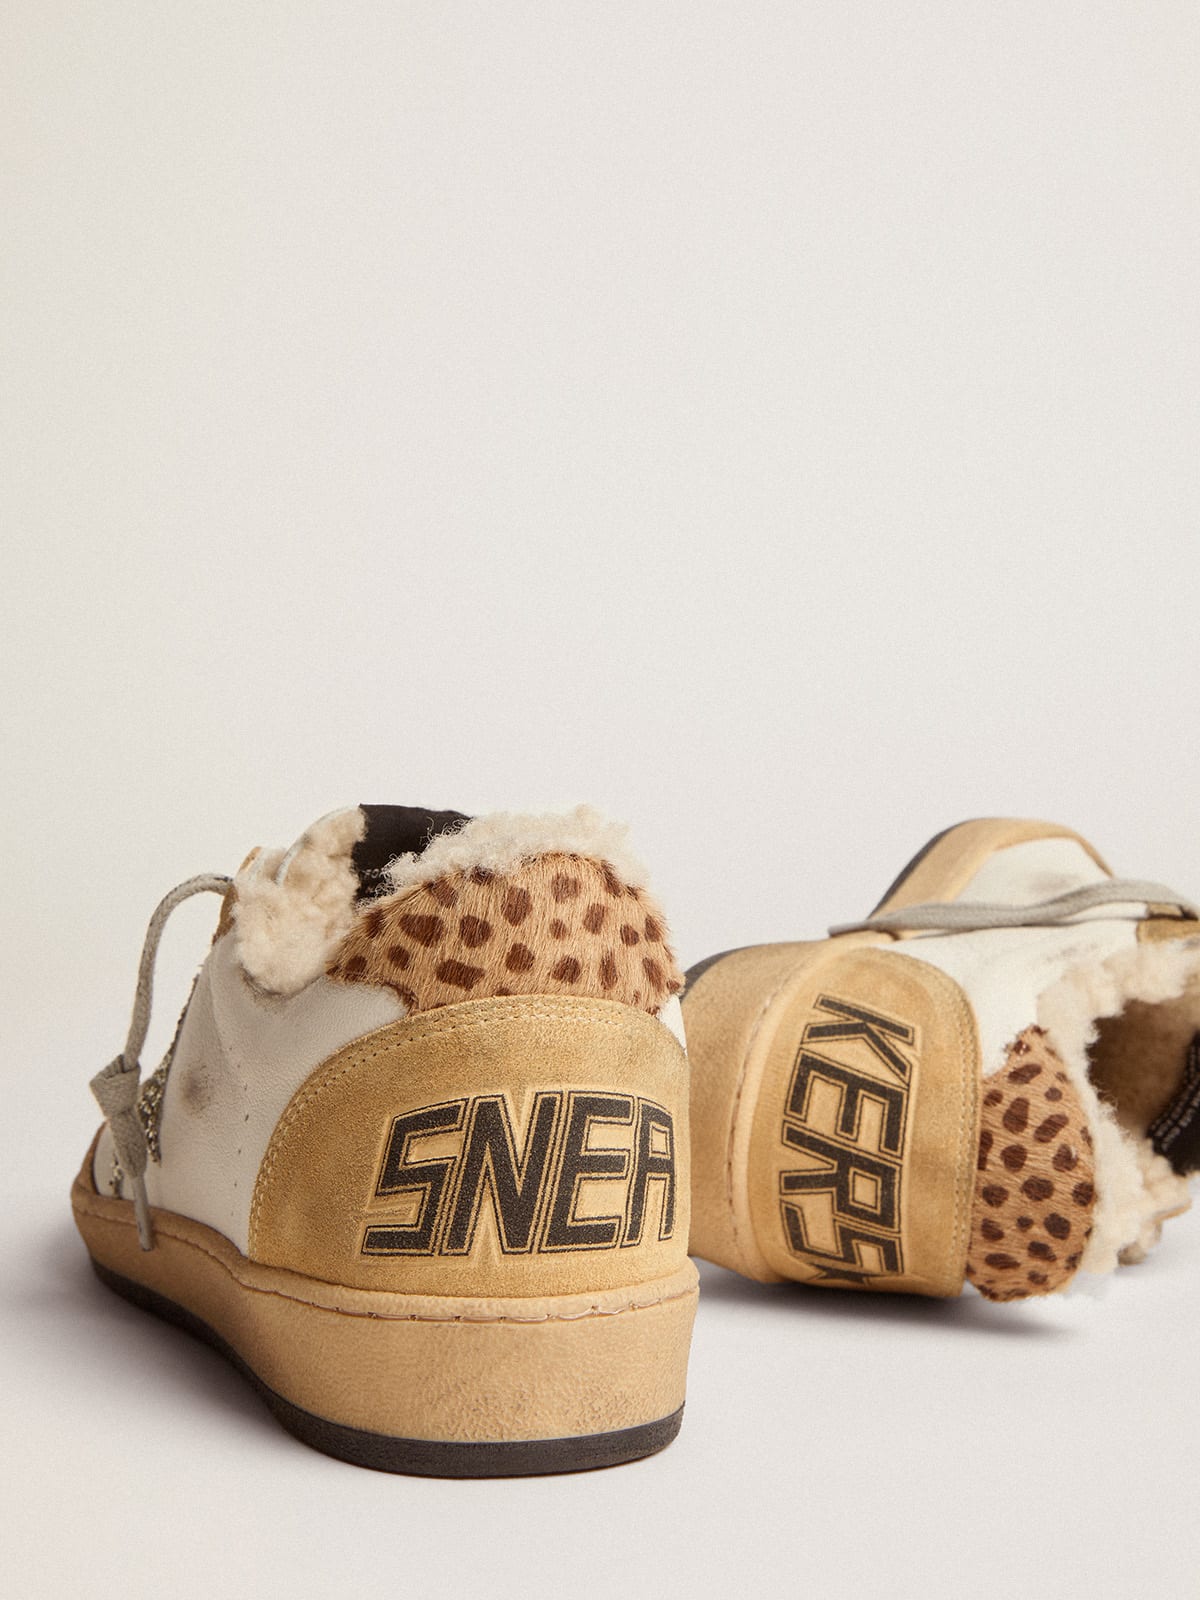 Golden Goose - Women's Ball Star in nappa with glitter star and shearling lining in 